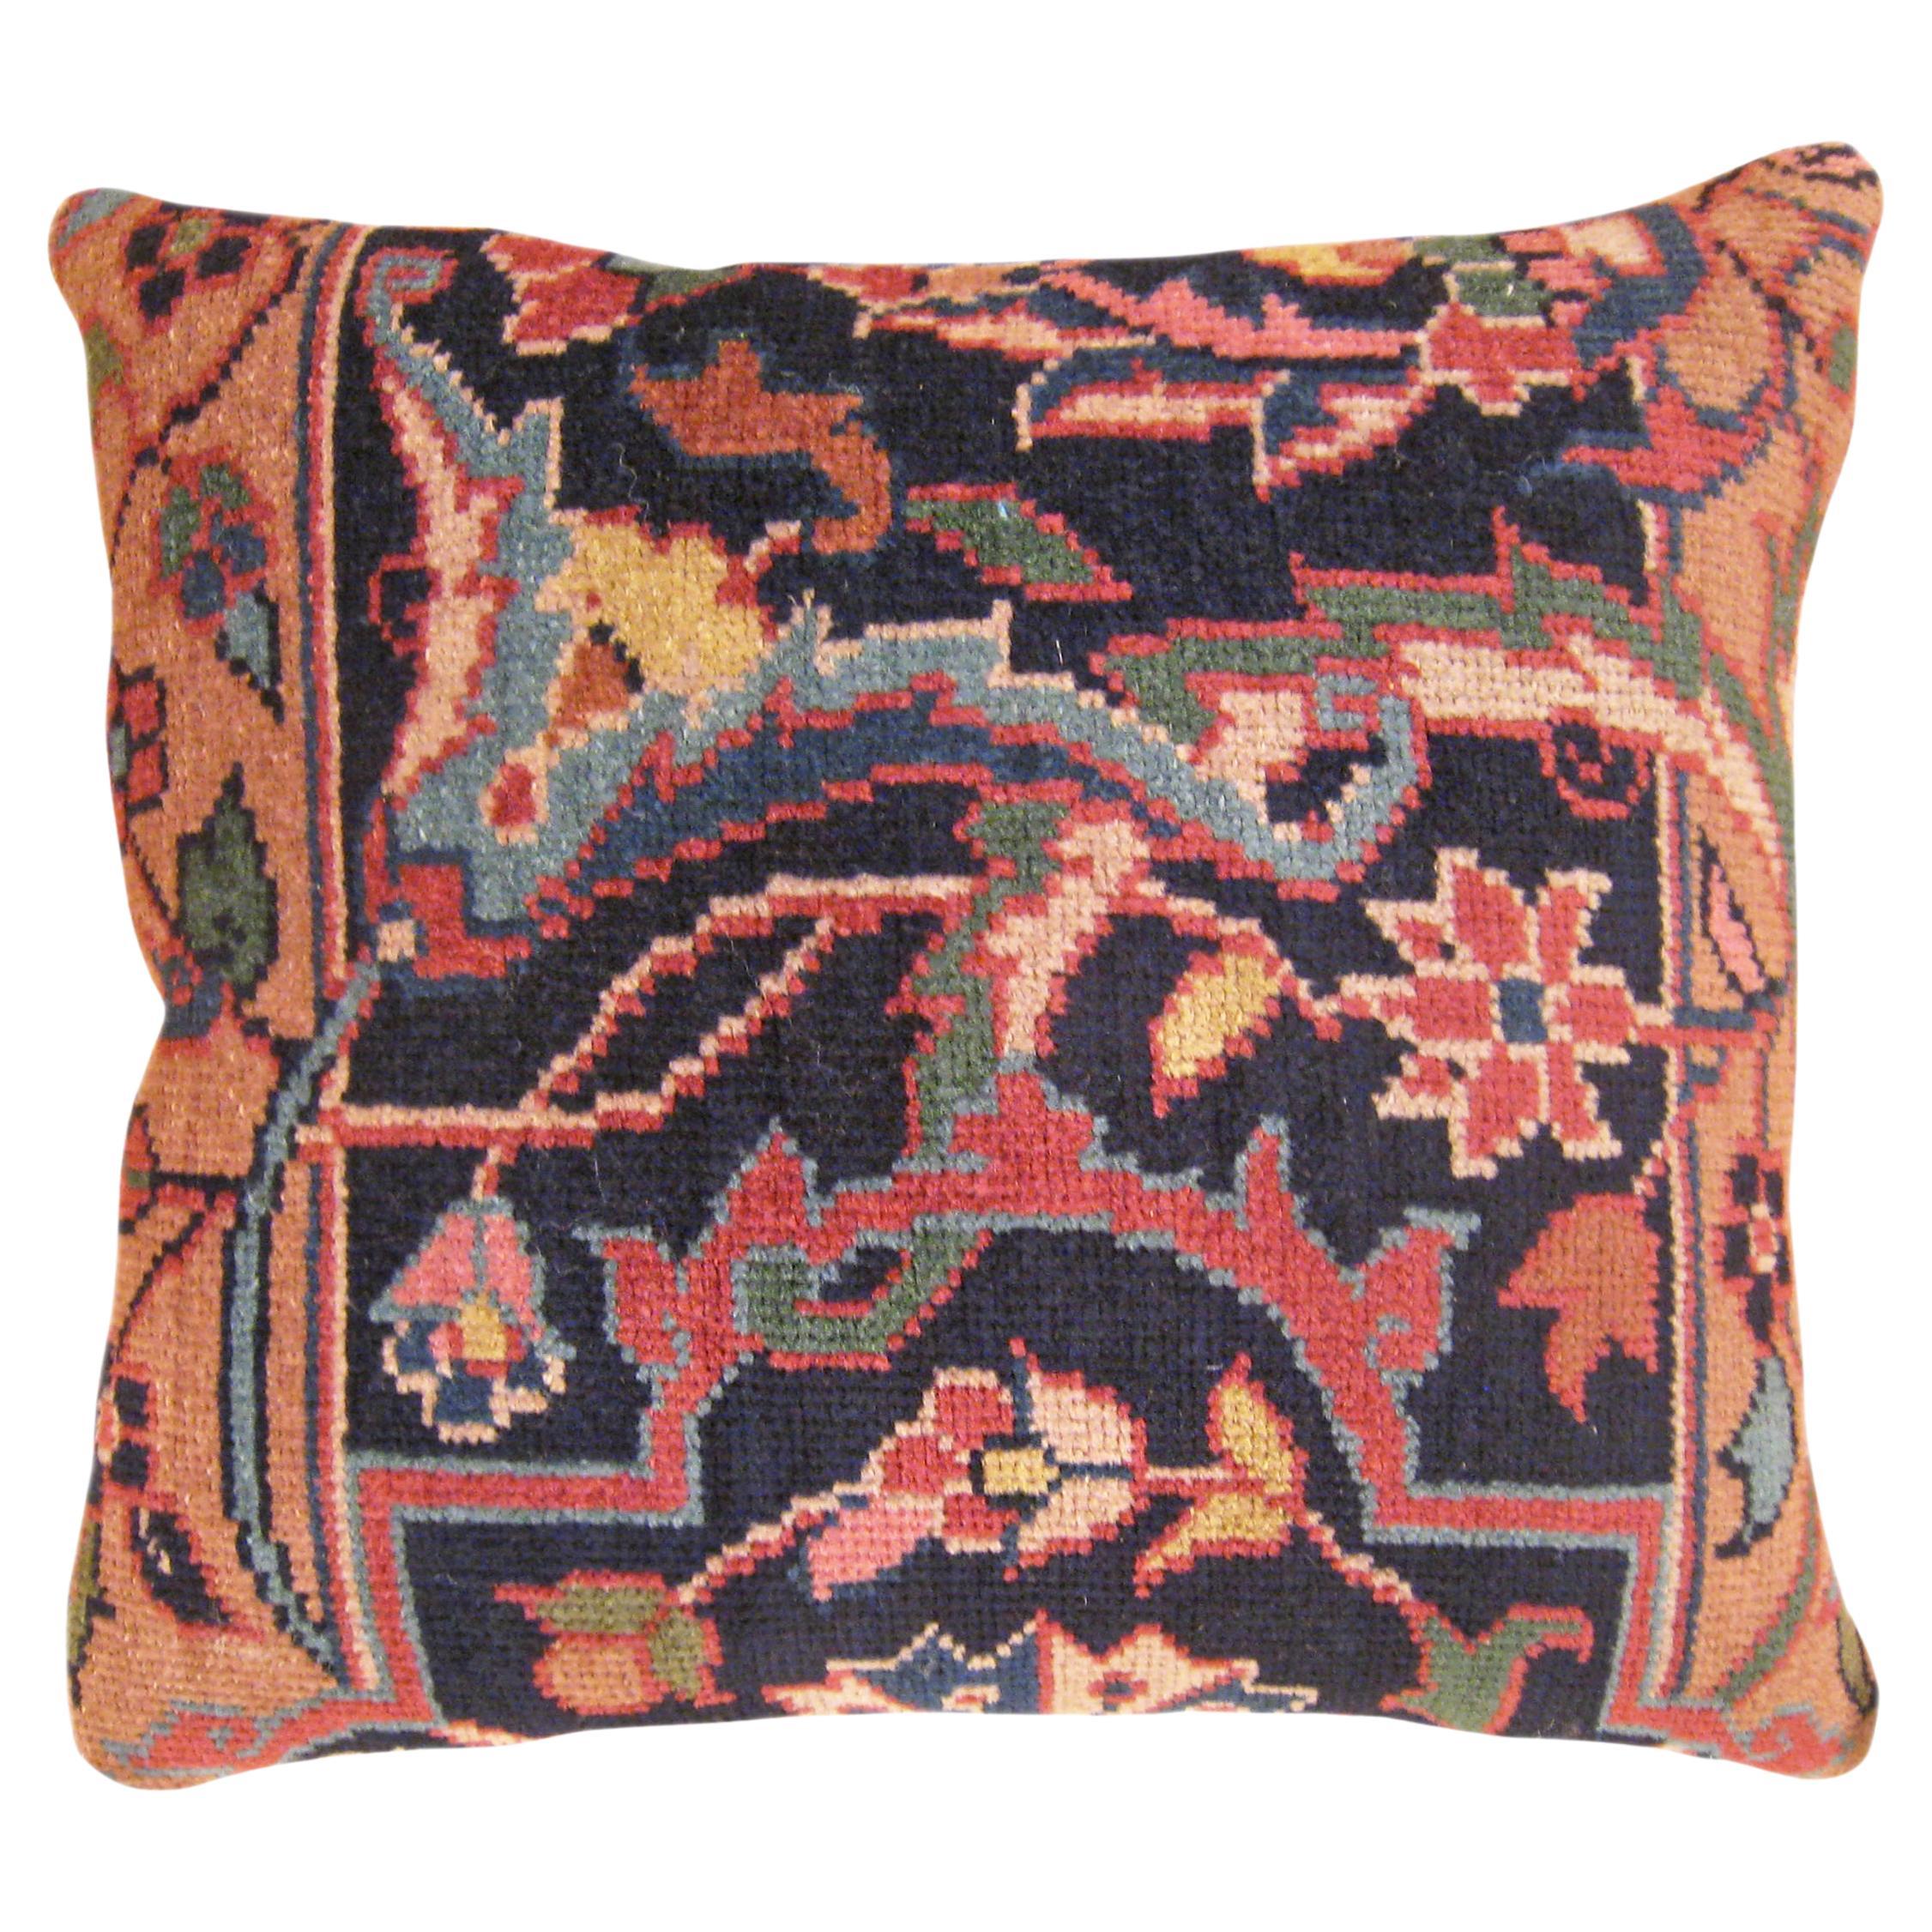 Decorative Antique Indian Agra Rug Pillow with Floral Elements For Sale